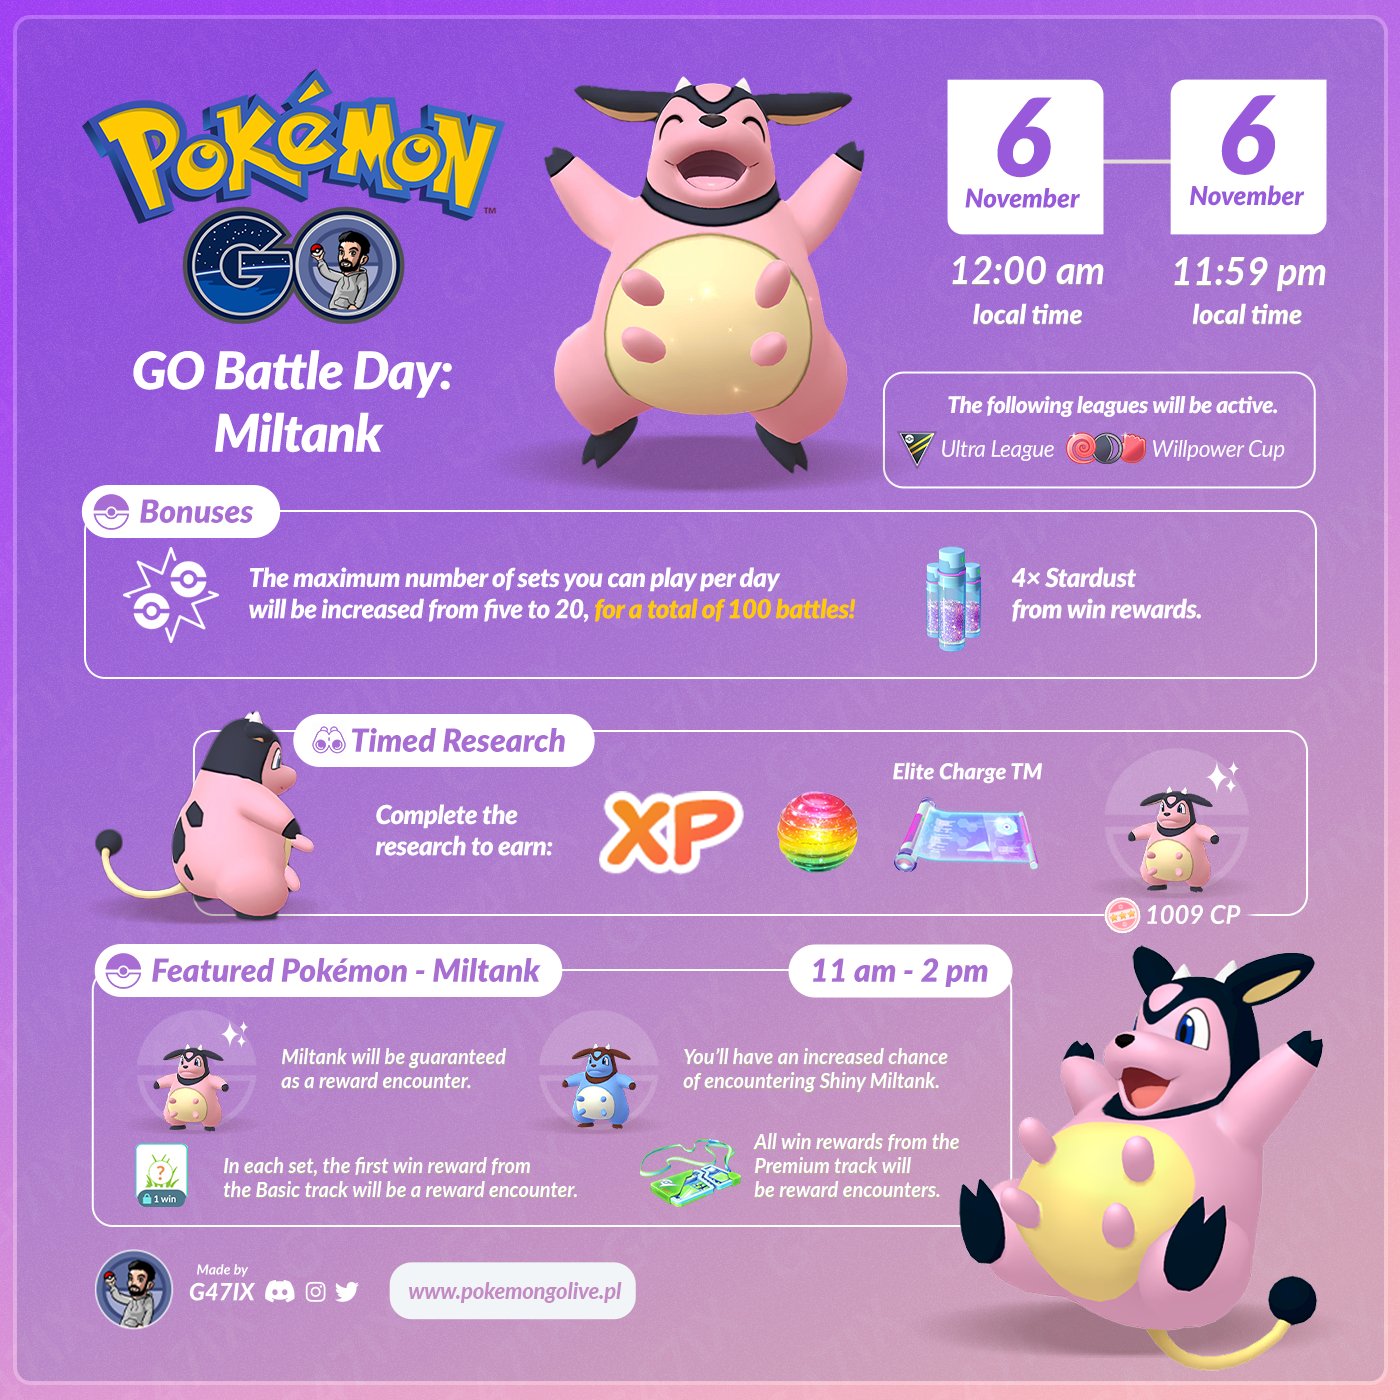 G47IX 🇵🇱 on Twitter "GO Battle Day Miltank! ⚔️ You will be able to do